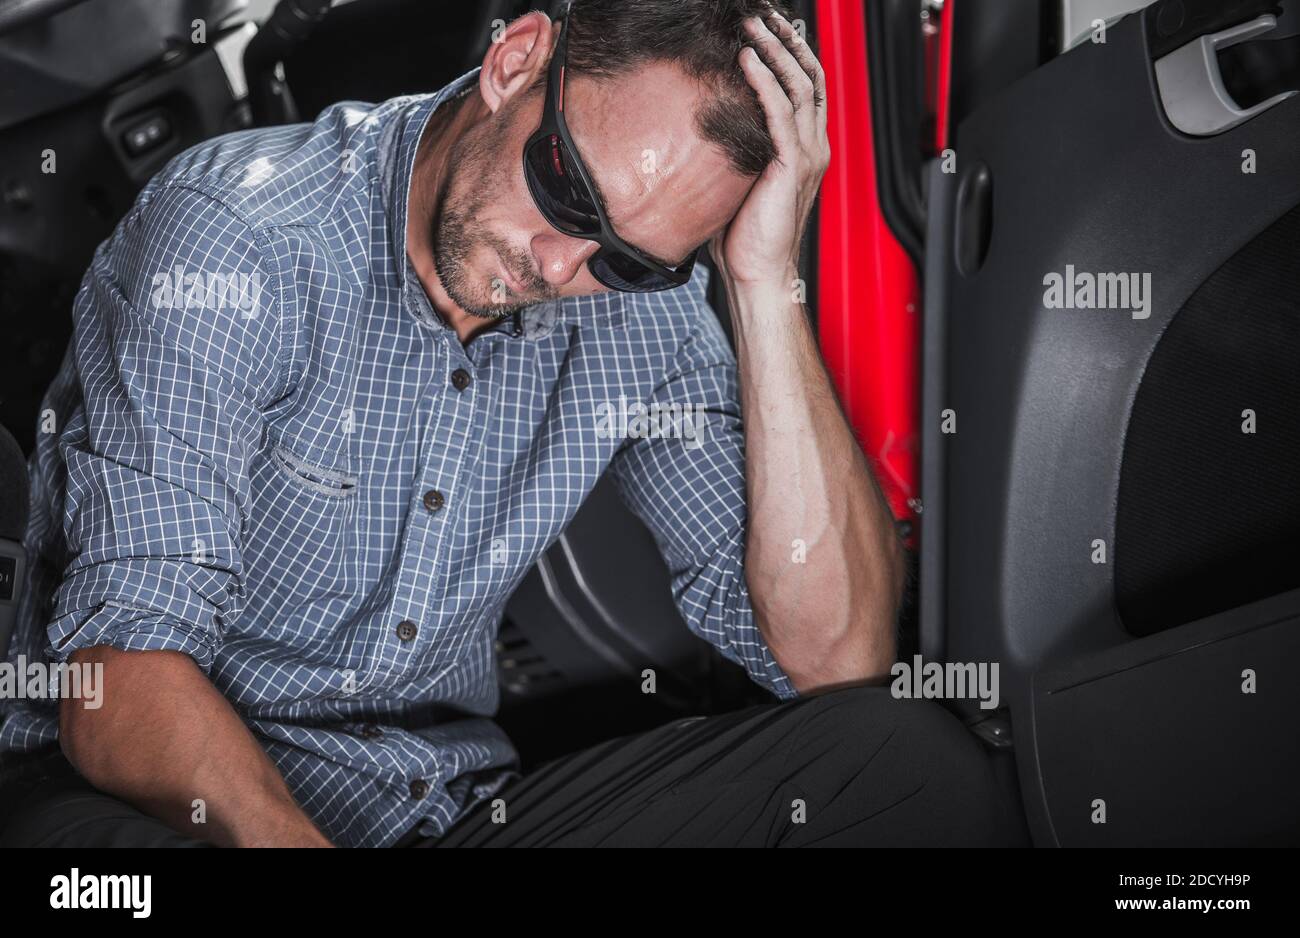 Jobless Caucasian Truck Driver in His 30s Feeling Sad and Frustrated. Unemployment Issue Concept Photo. Stock Photo